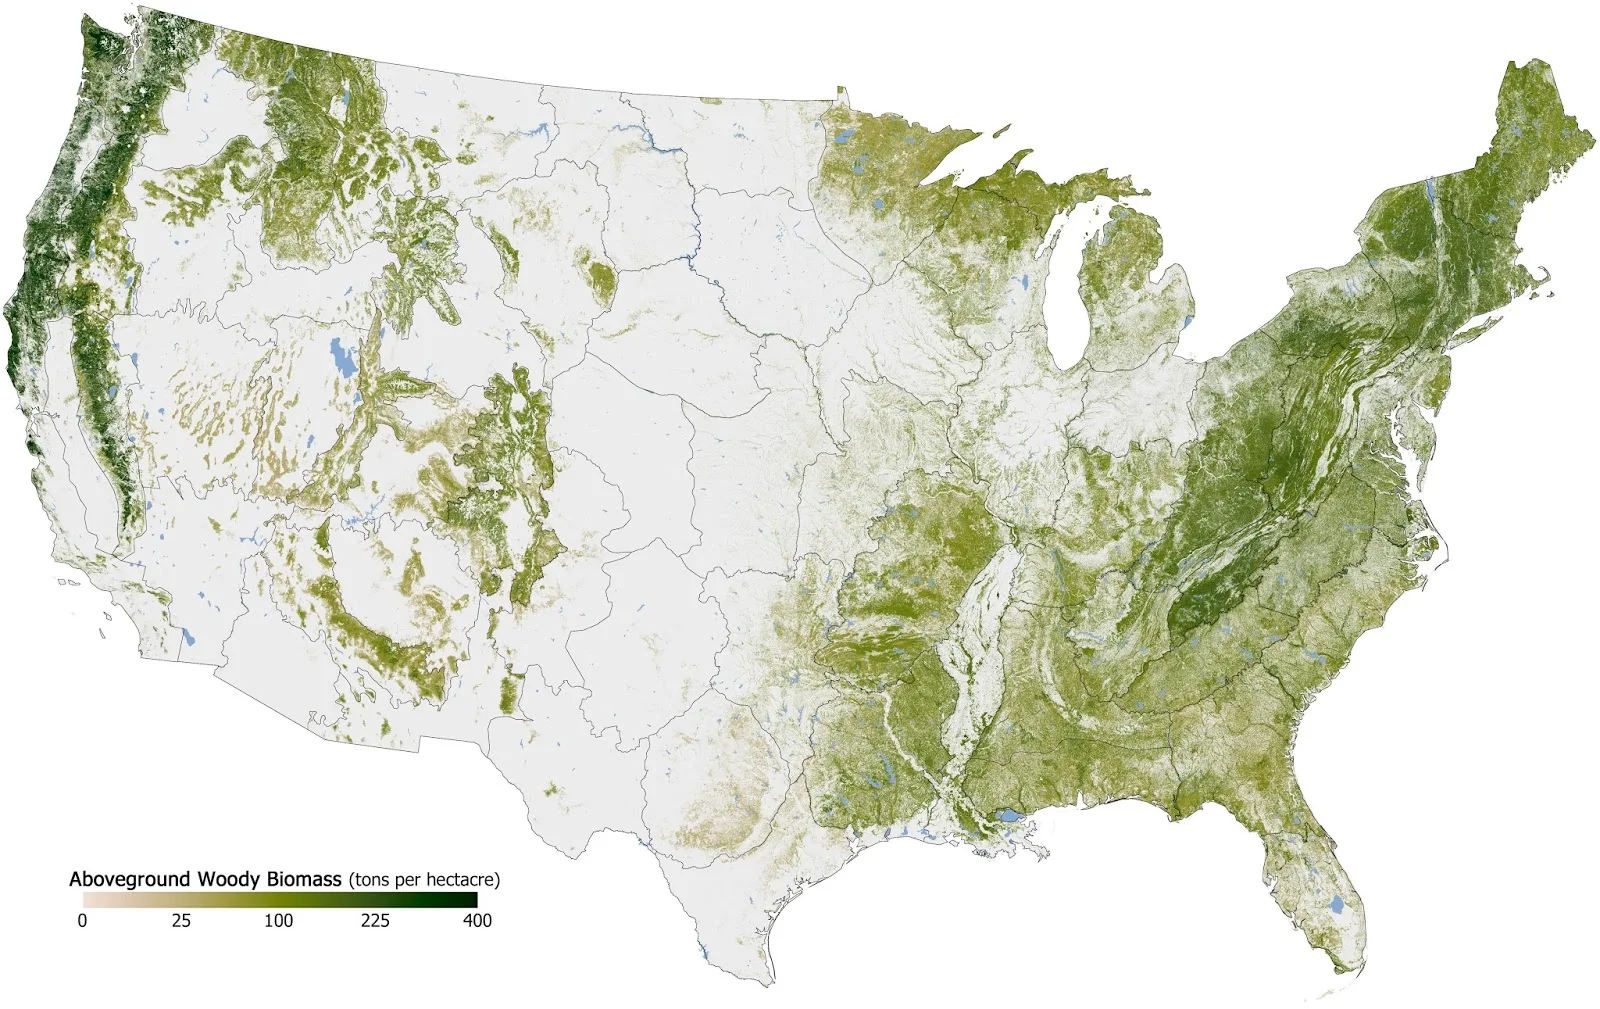 Forested Area in the U.S.